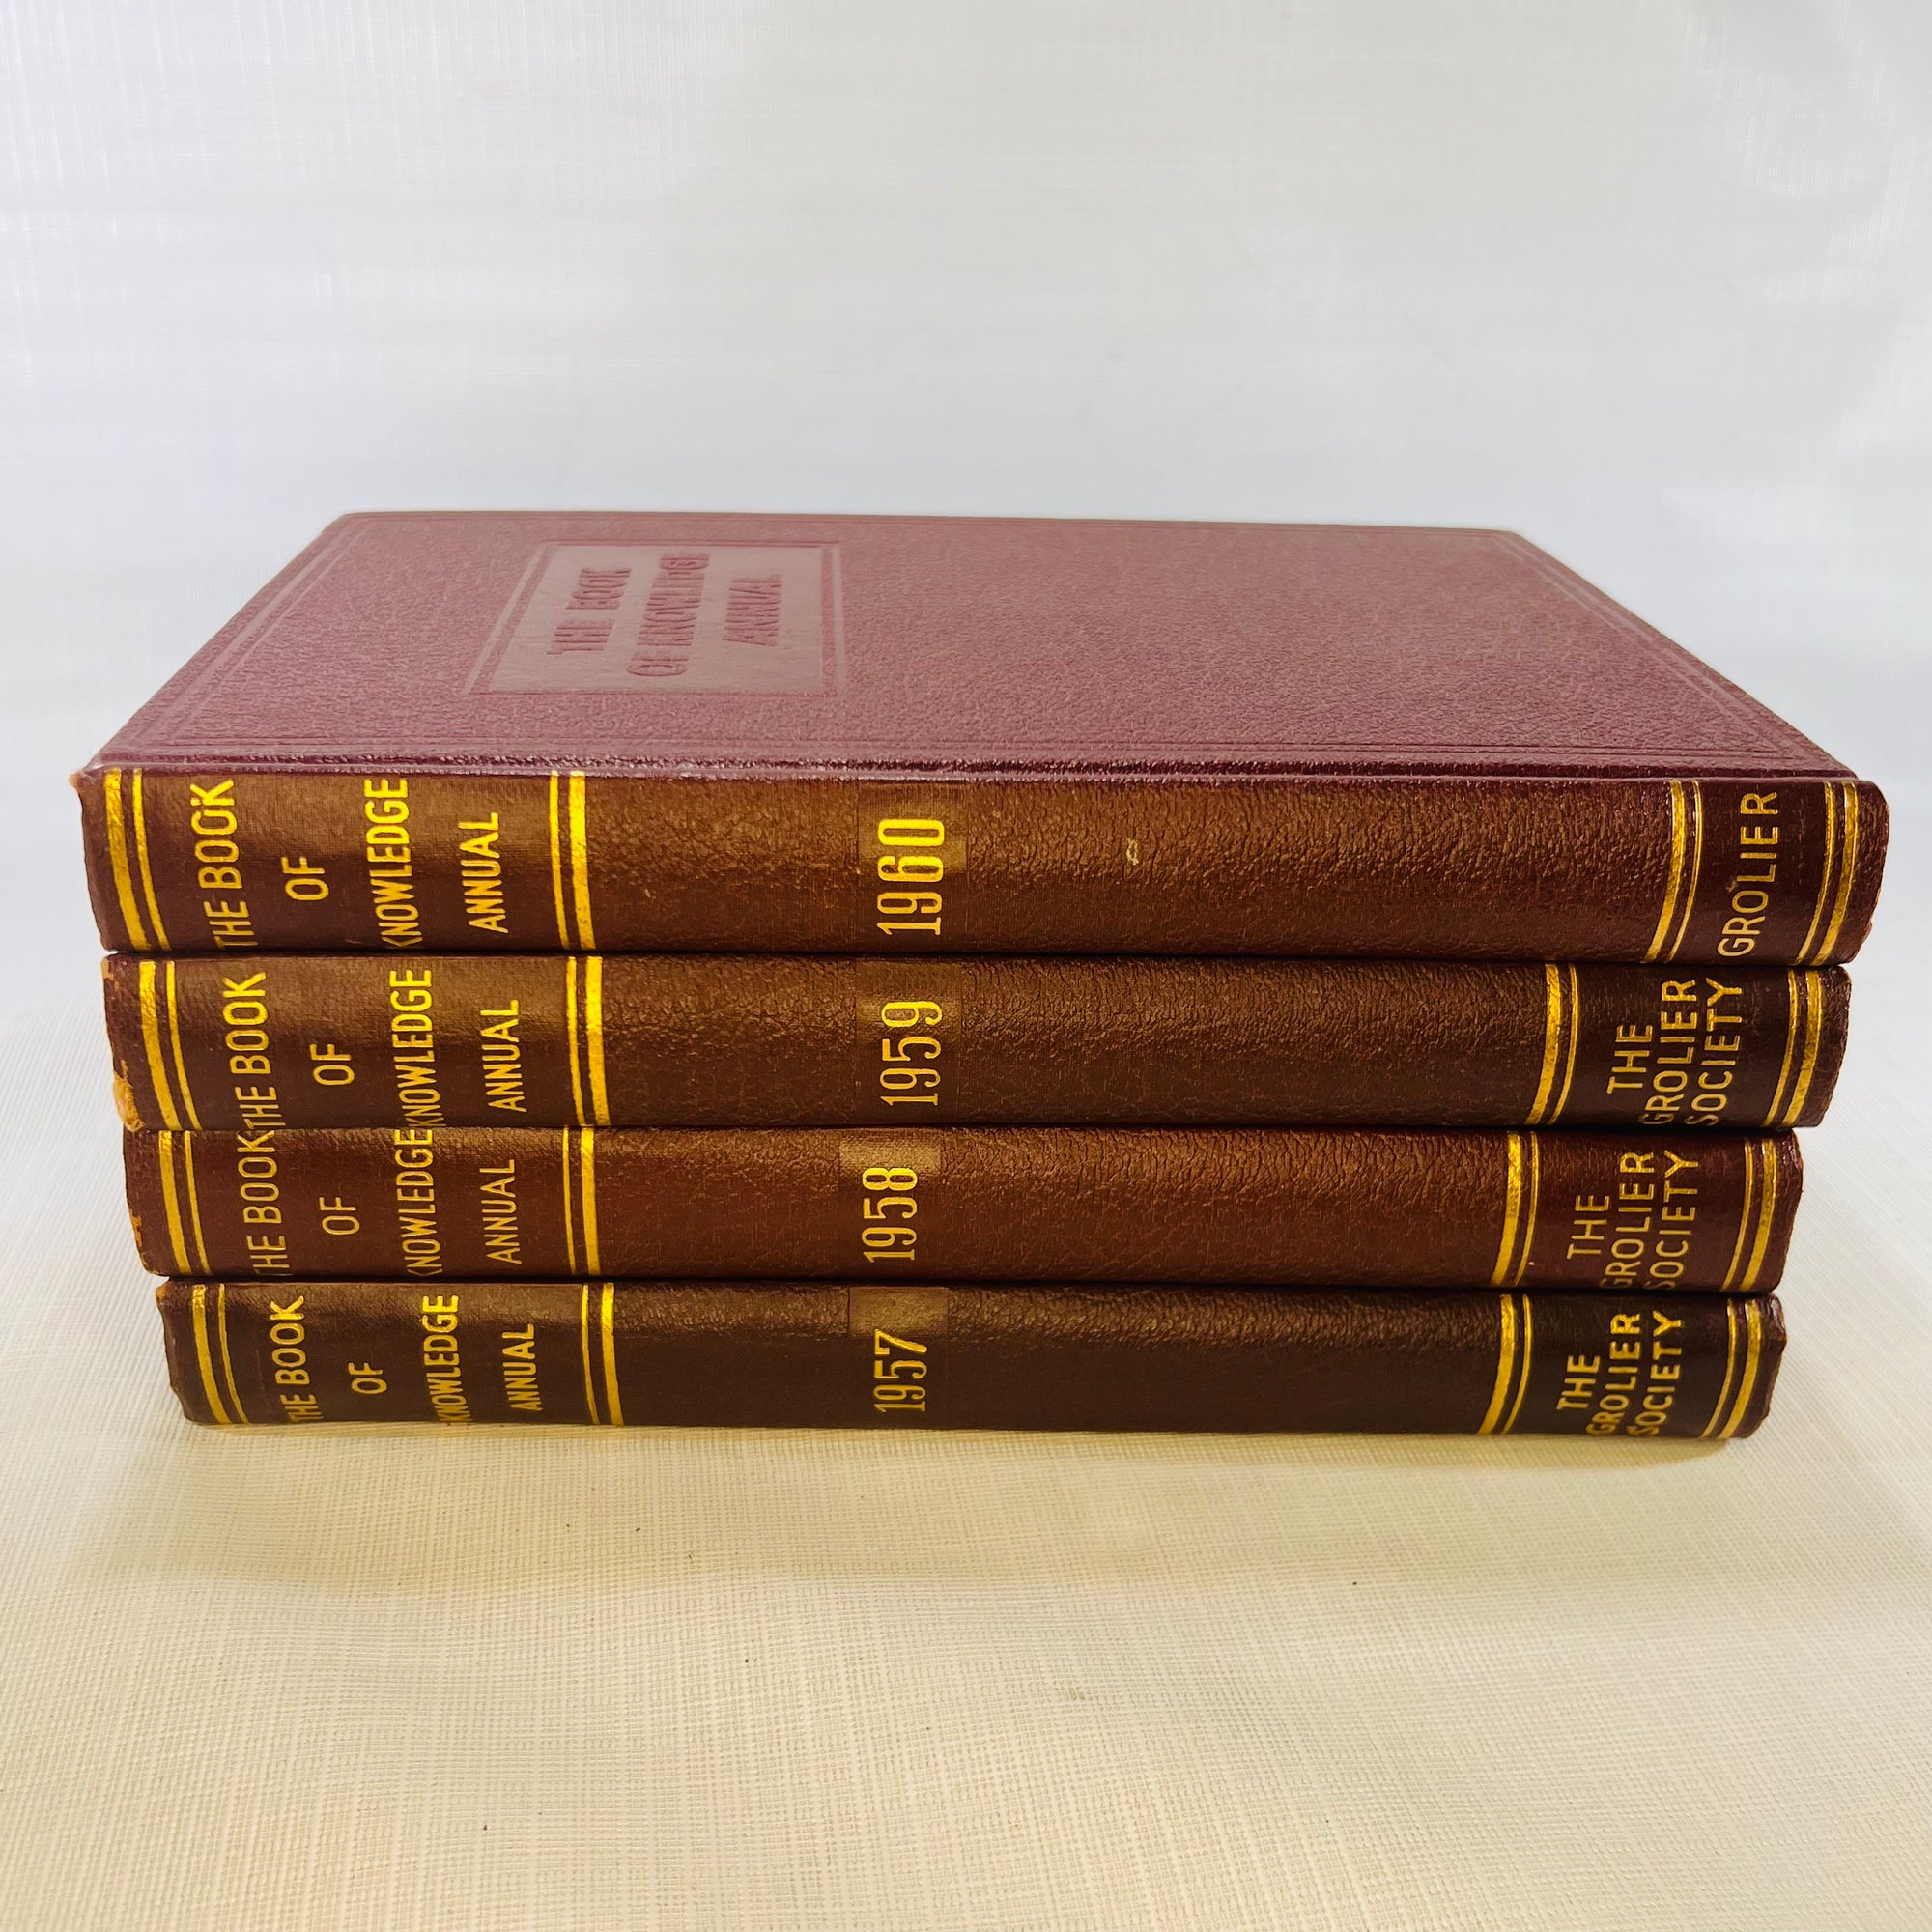 The Book of Knowledge Annual 1957, 1958, 1959 & 1960 of the Children's Encyclopedia The Grolier Society